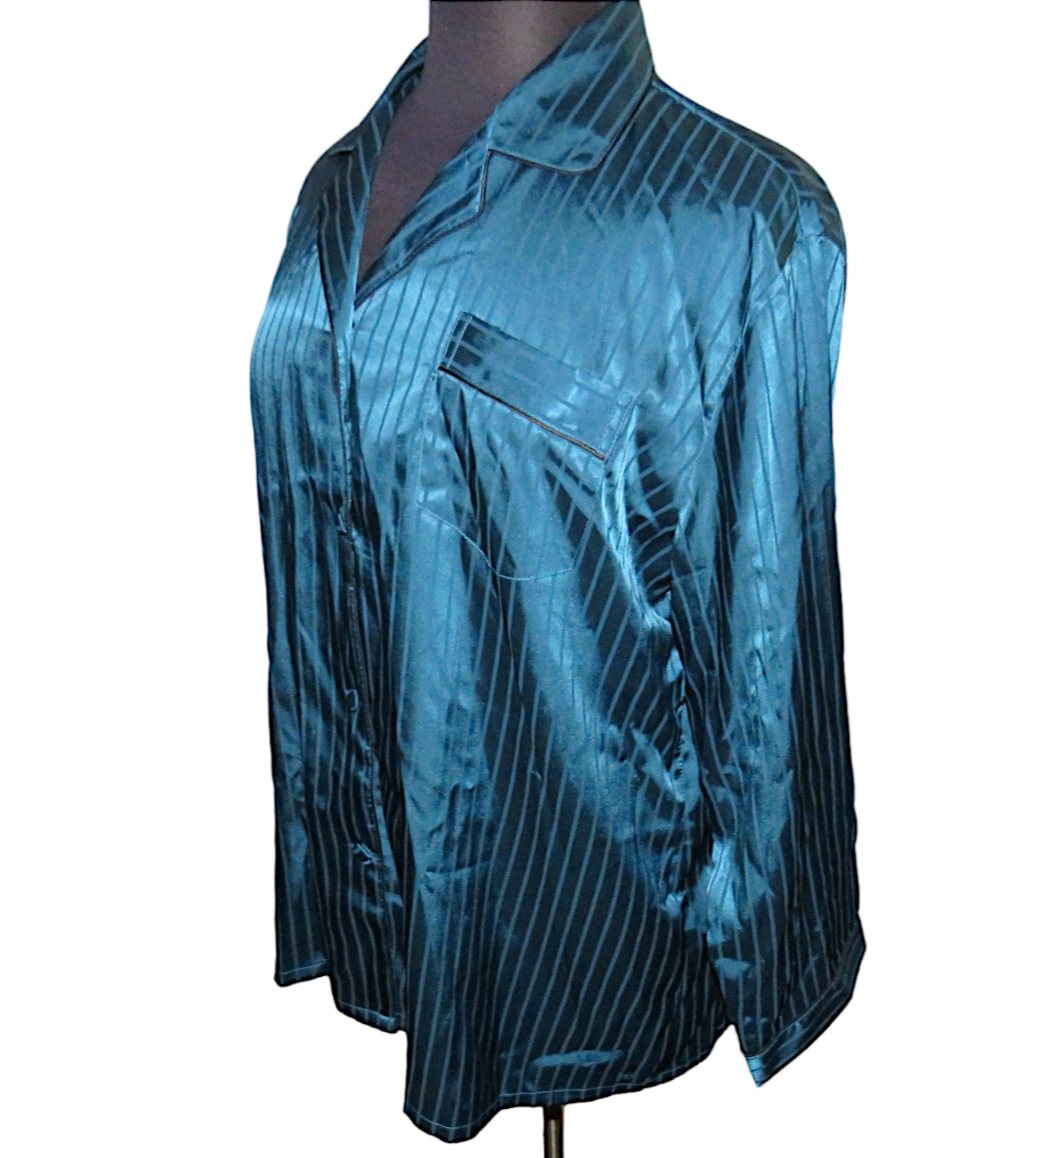 Primary image for Lonxu Women's Peacock Blue Satin Striped Button Up Pajama Top Plus 2X